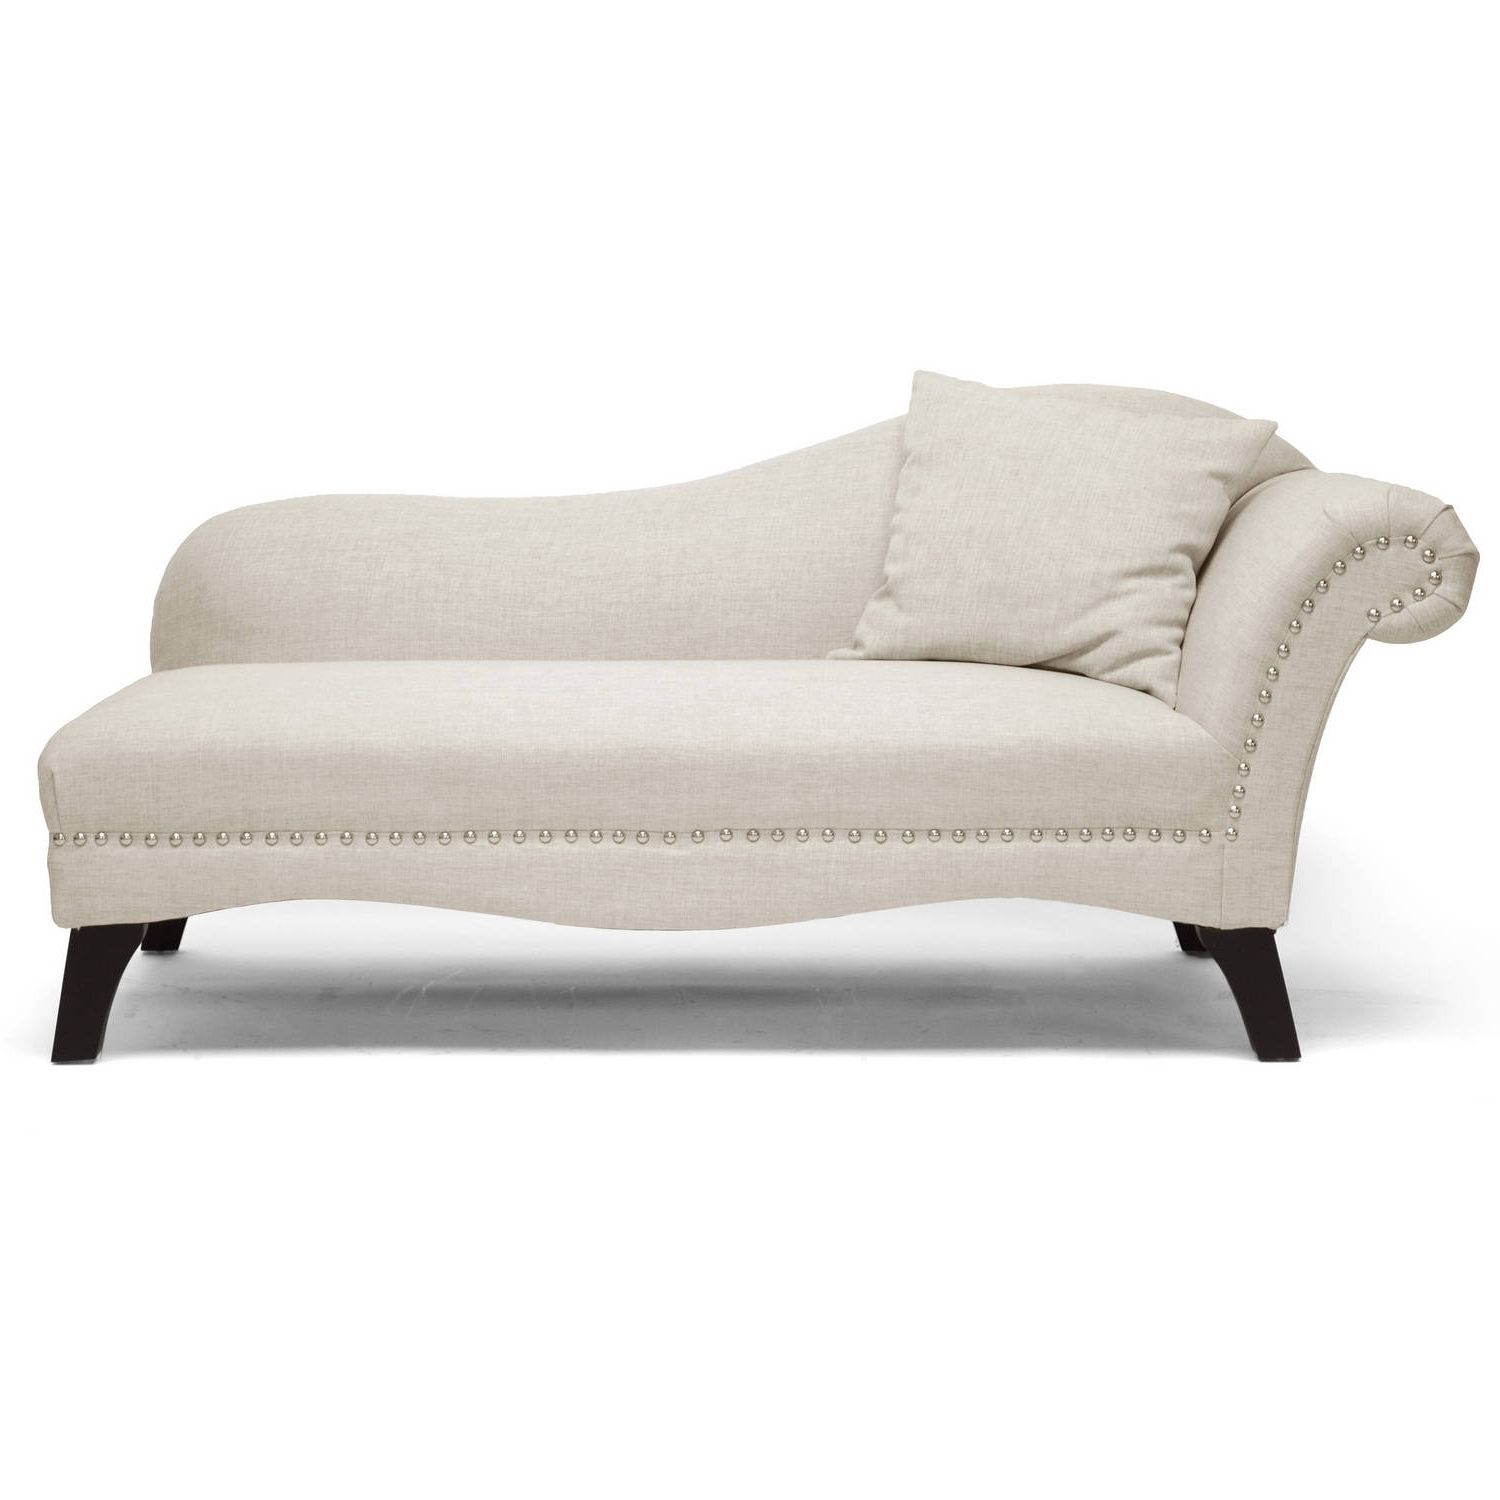 Preferred Chaise Lounges – Walmart Regarding Pink Chaises (View 12 of 15)